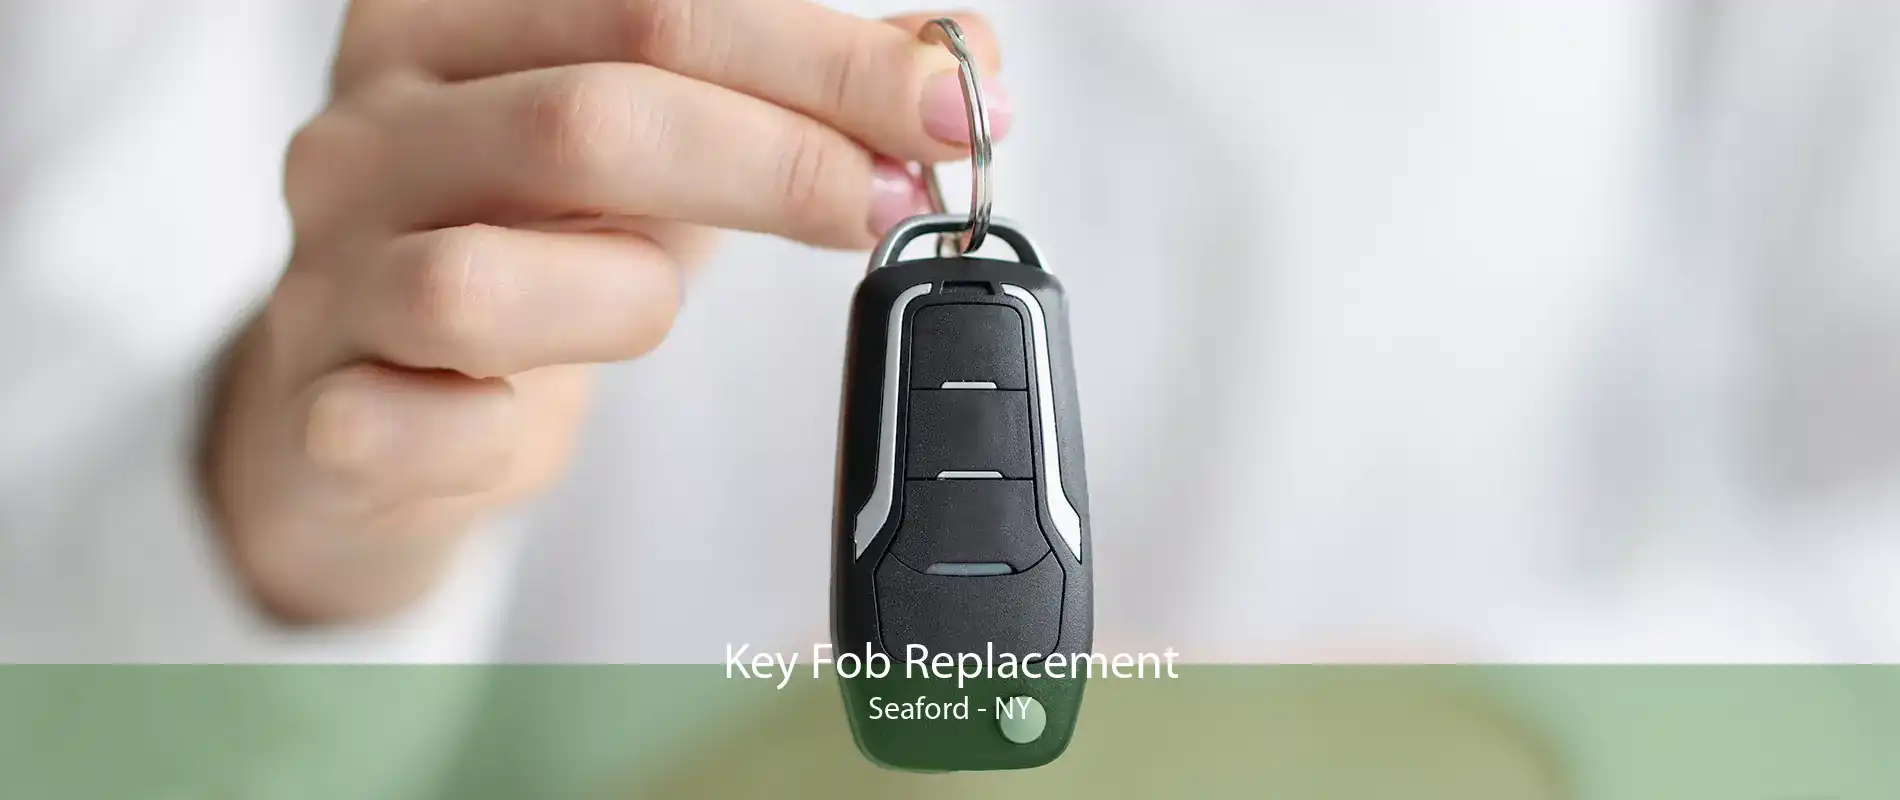 Key Fob Replacement Seaford - NY